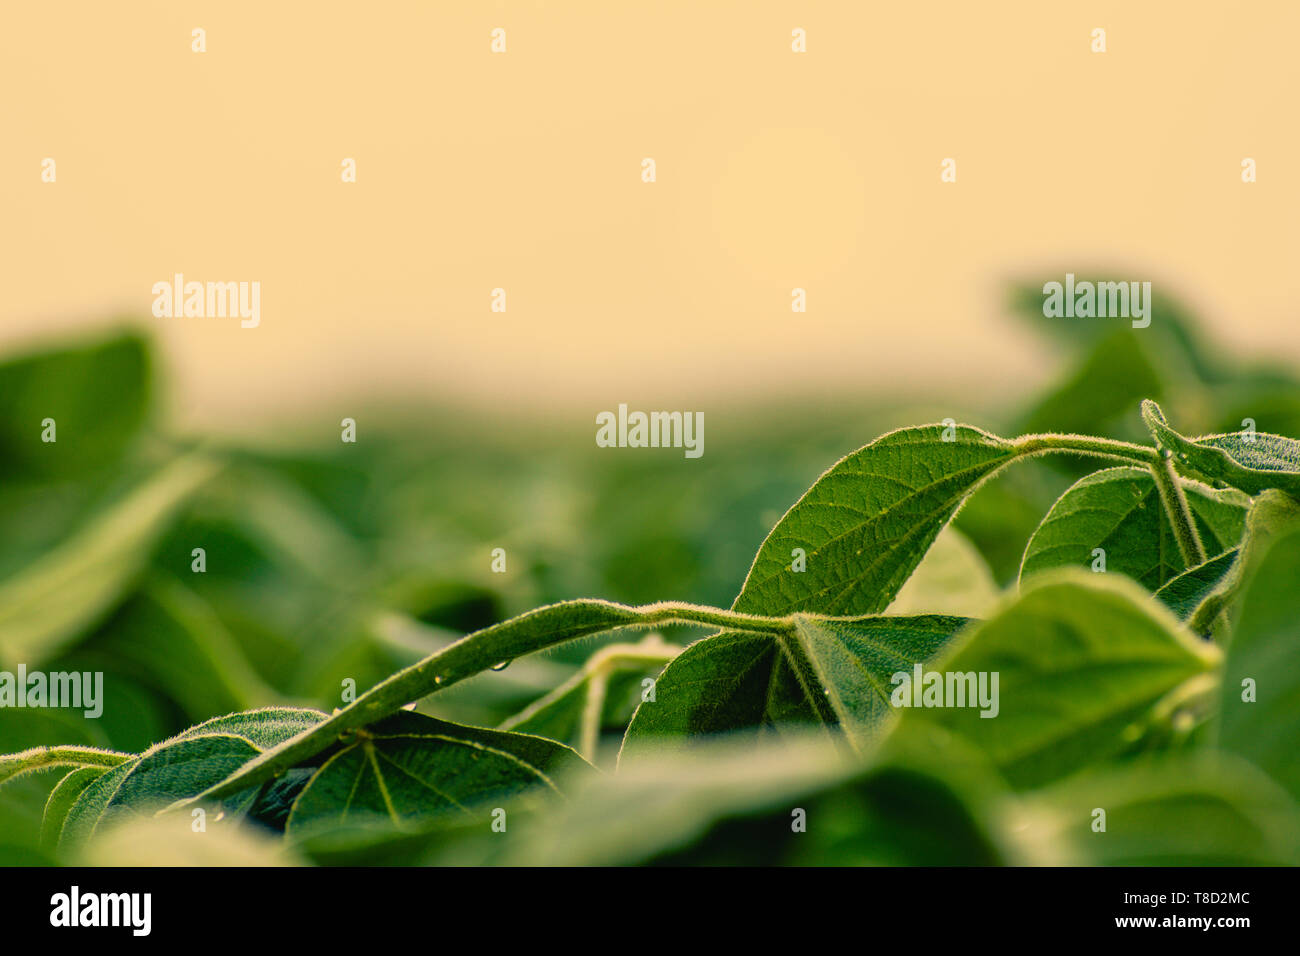 Close up of soybean leaves with blurry background and foreground.  Golden hour color shining on leaves. Stock Photo